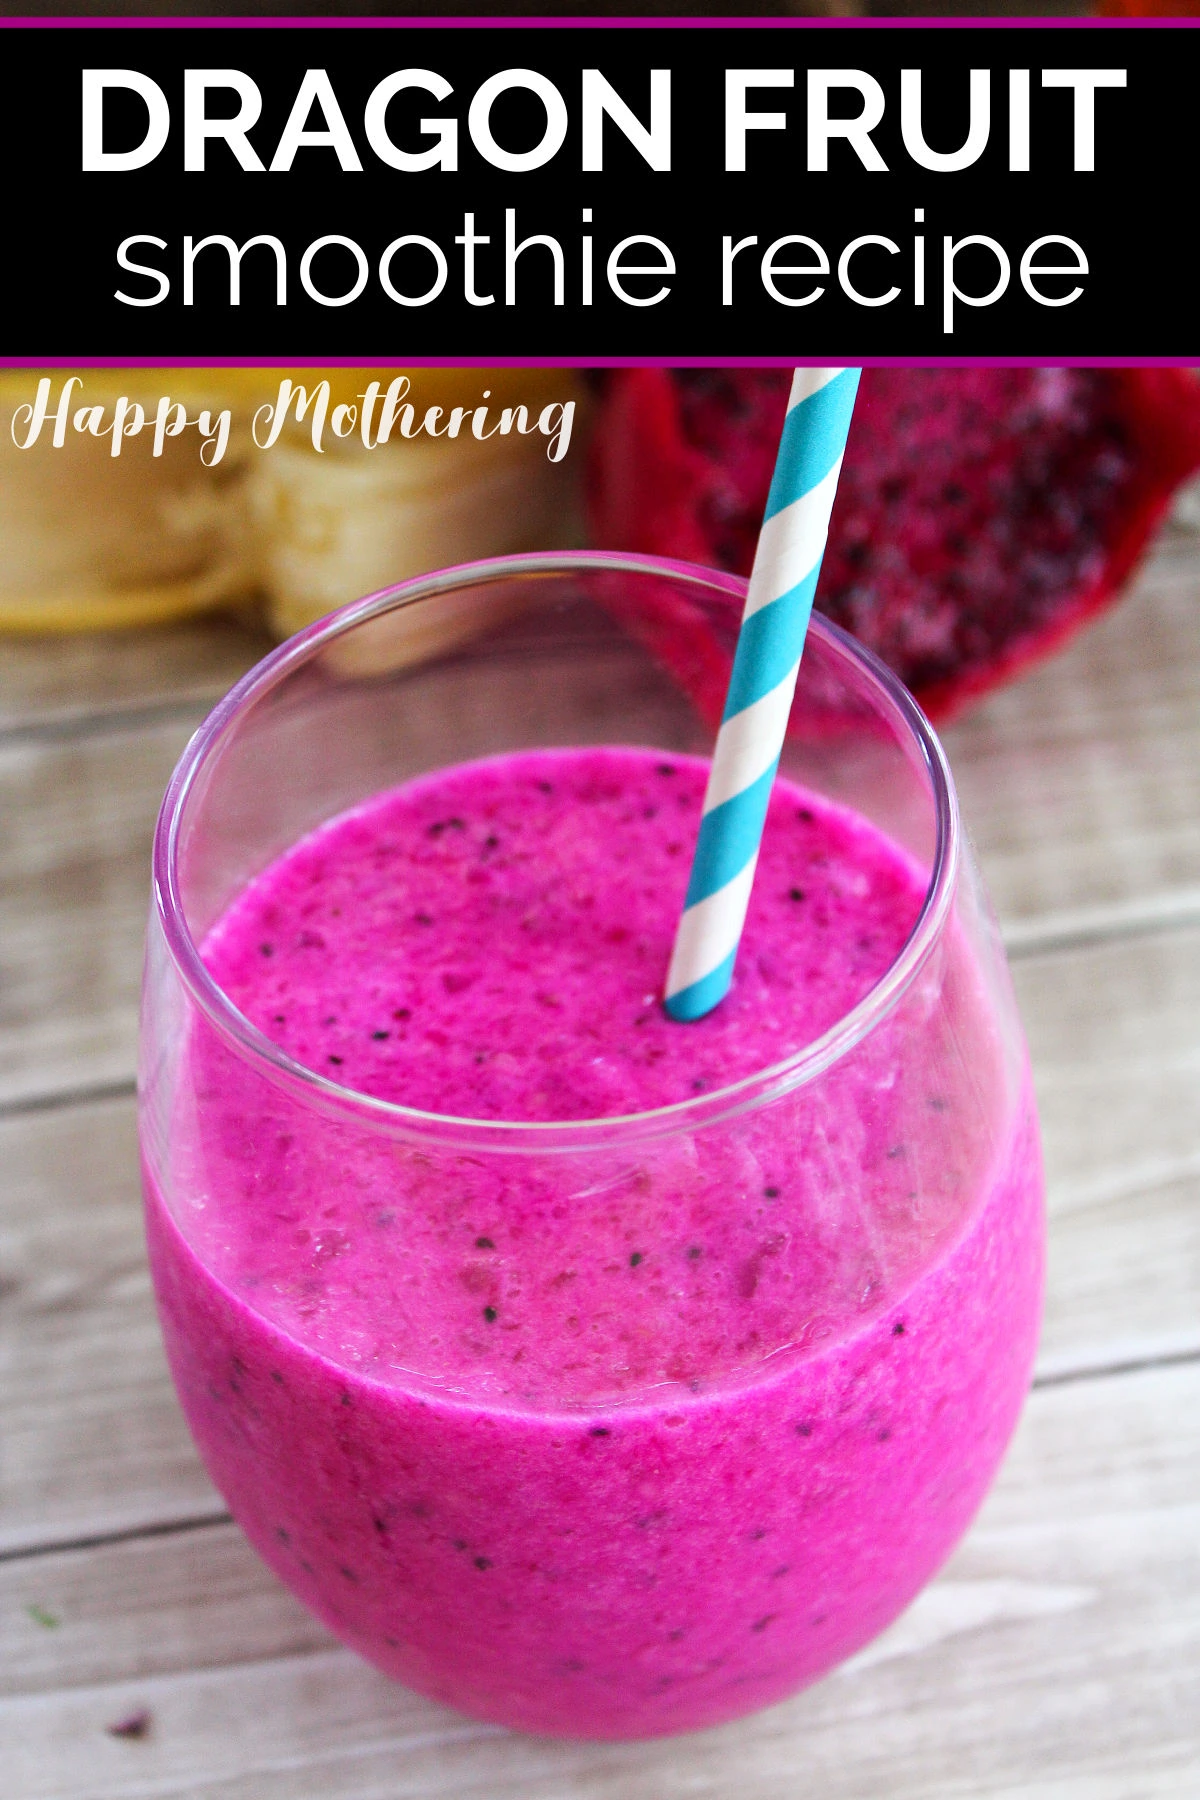 A Dragon Fruit Smoothie is a fun way to introduce your family to exotic fruits. The bright pink color and slightly sweet flavor make a unique smoothie!